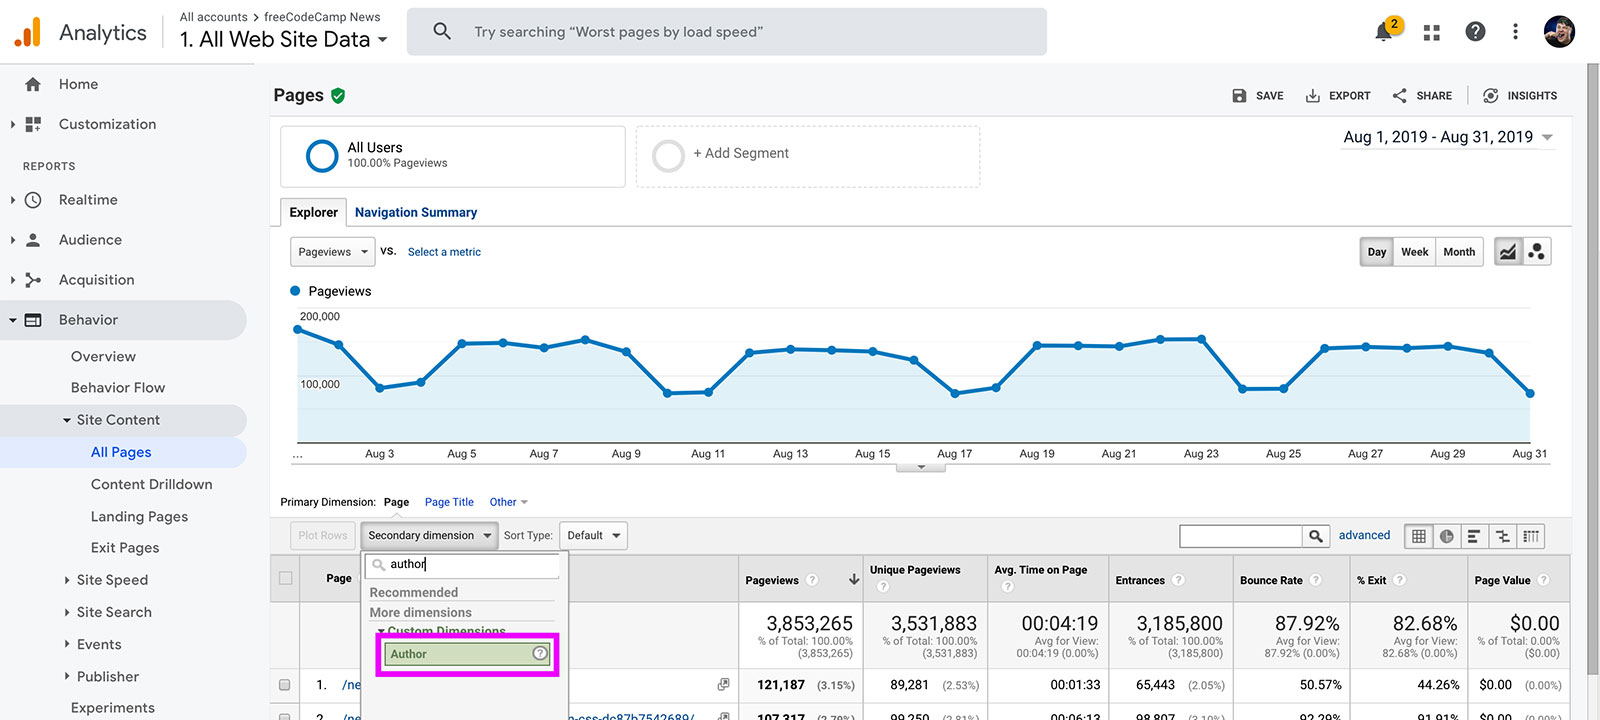 Selecting Author as a Secondary dimension on the Google Analytics Behavior Report